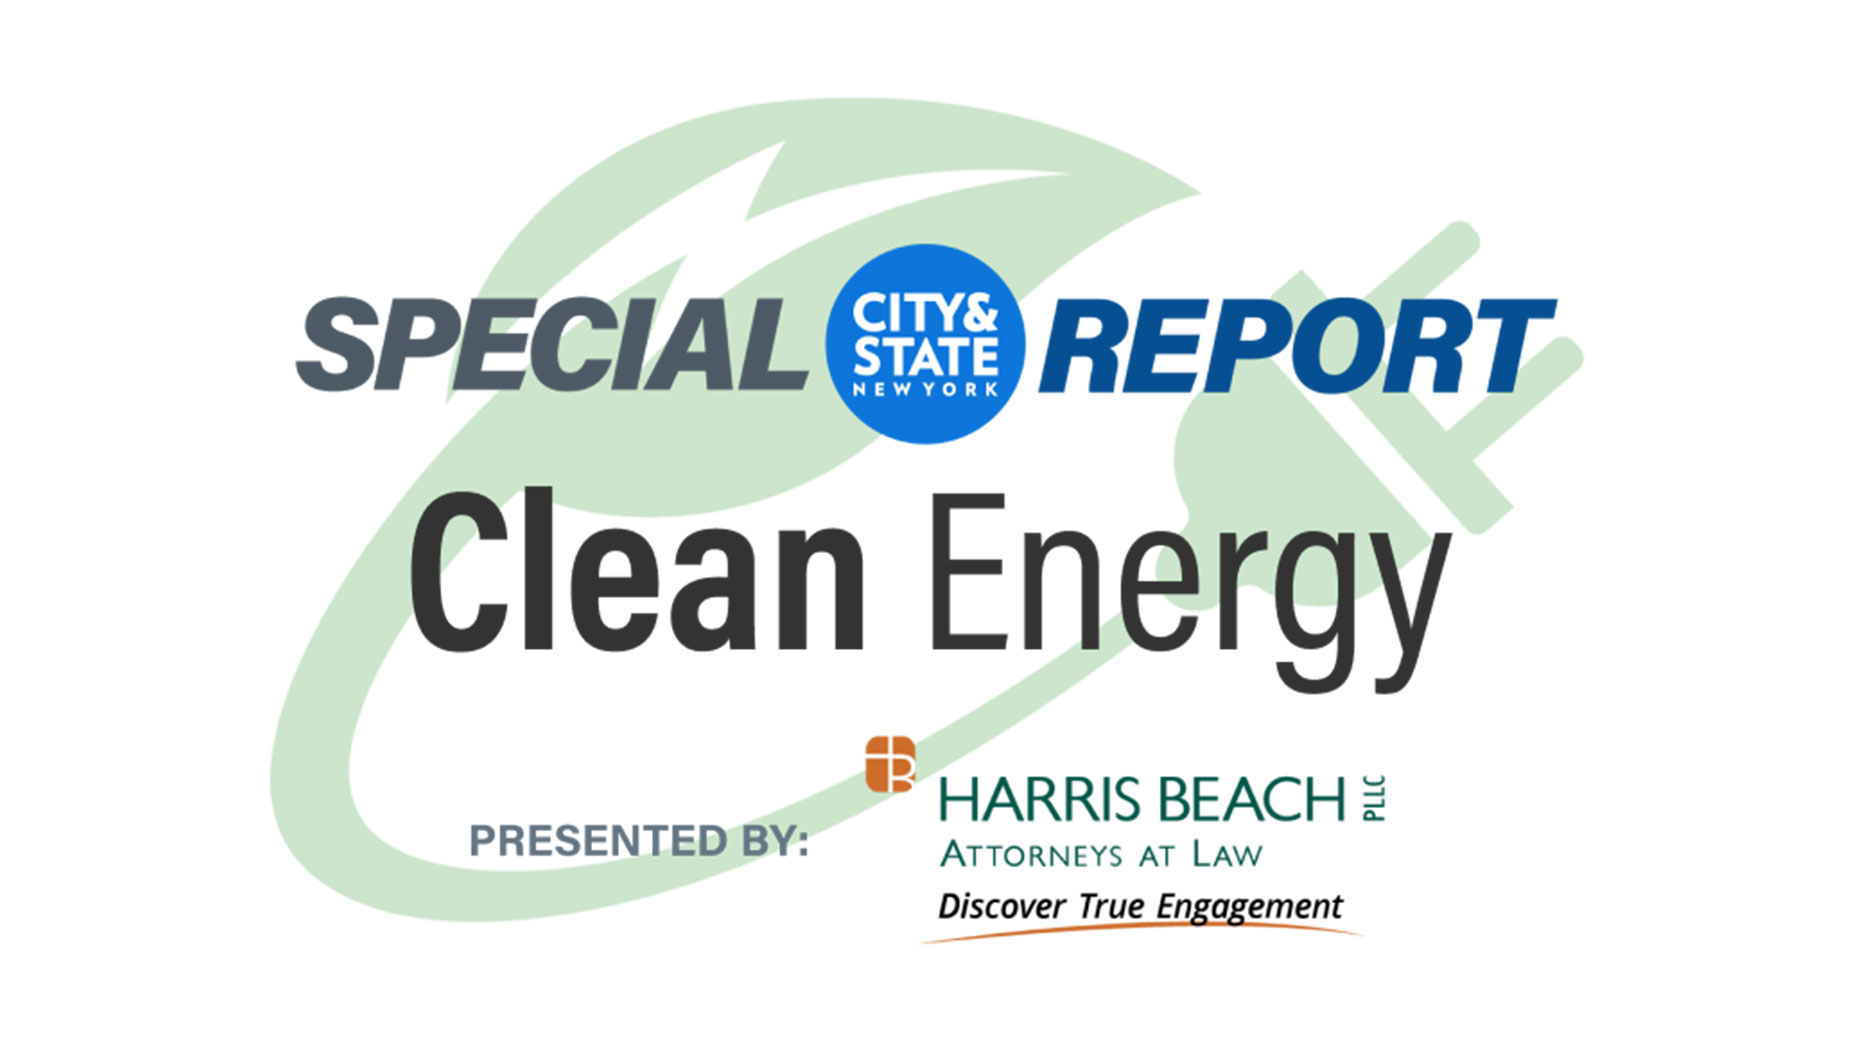 Special Report: Clean Energy. Presented By Harris Beach Attorneys at Law